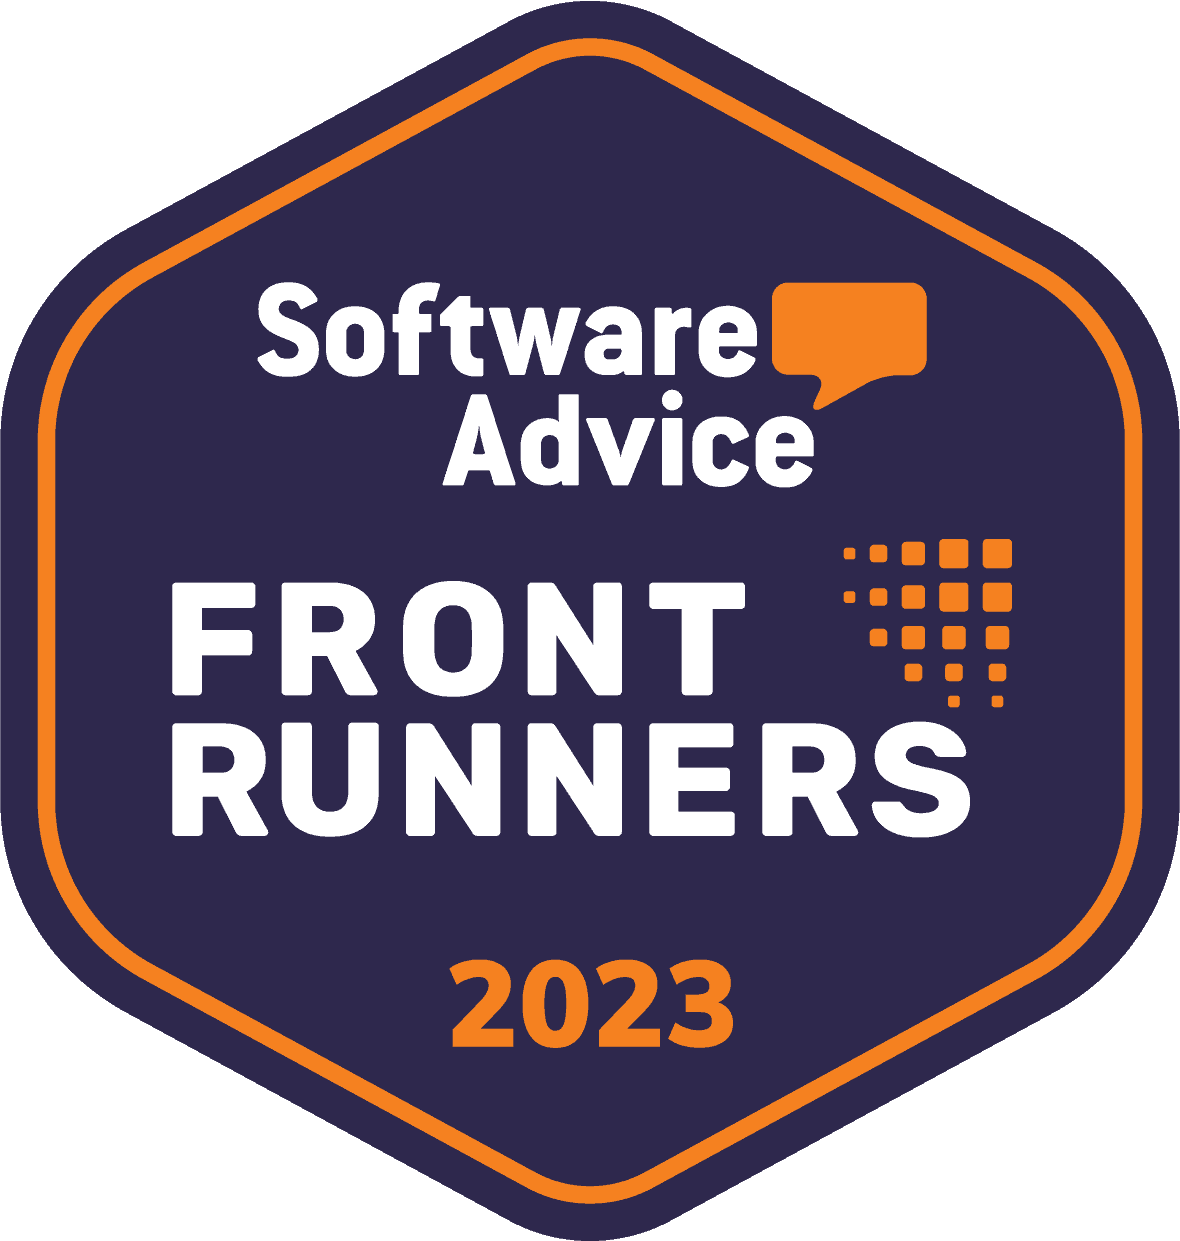 Software Advace Front Runners